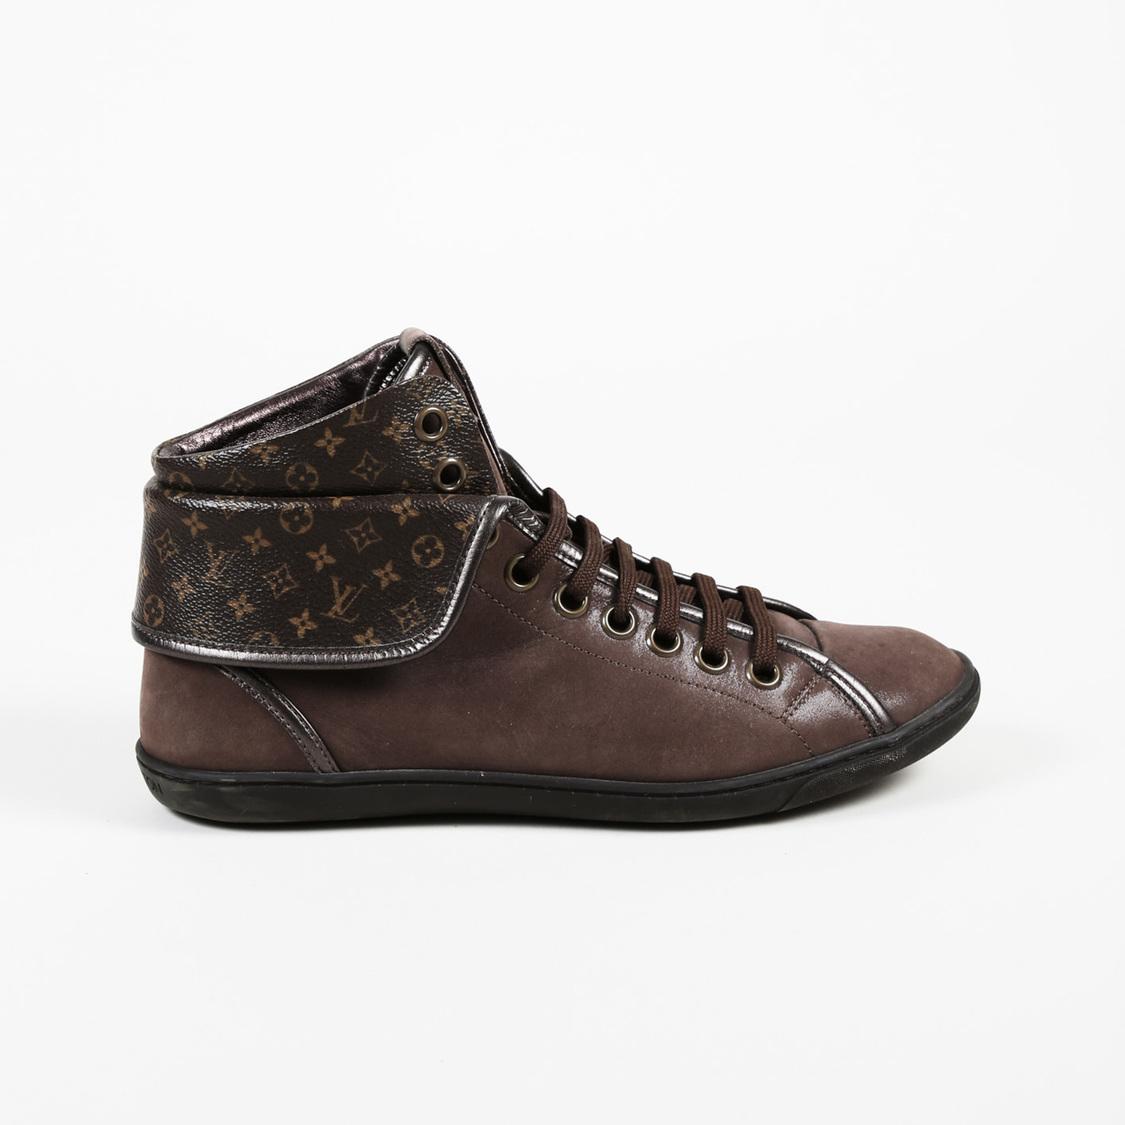 Louis Vuitton Monogram Canvas Leather Sneakers in Brown - Lyst